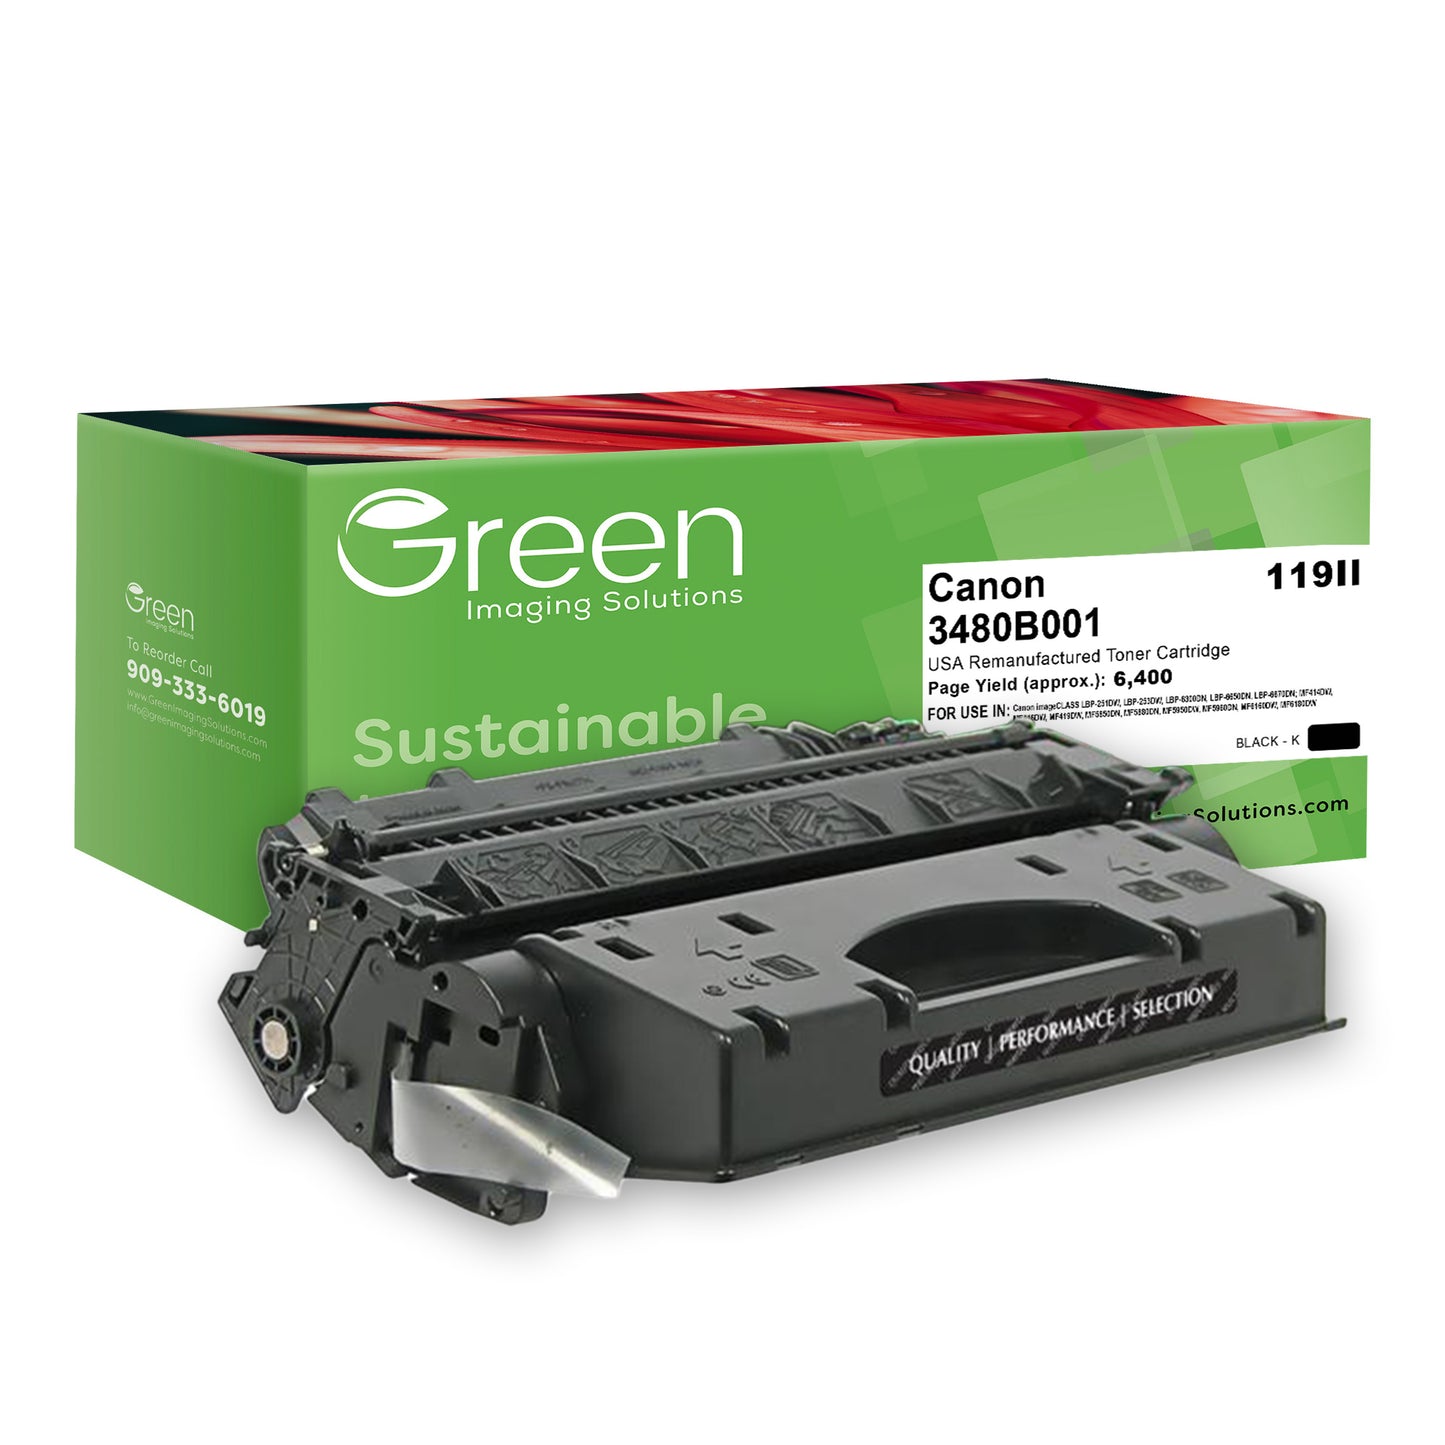 Green Imaging Solutions USA Remanufactured Toner Cartridge for Canon 3480B001 (119II)